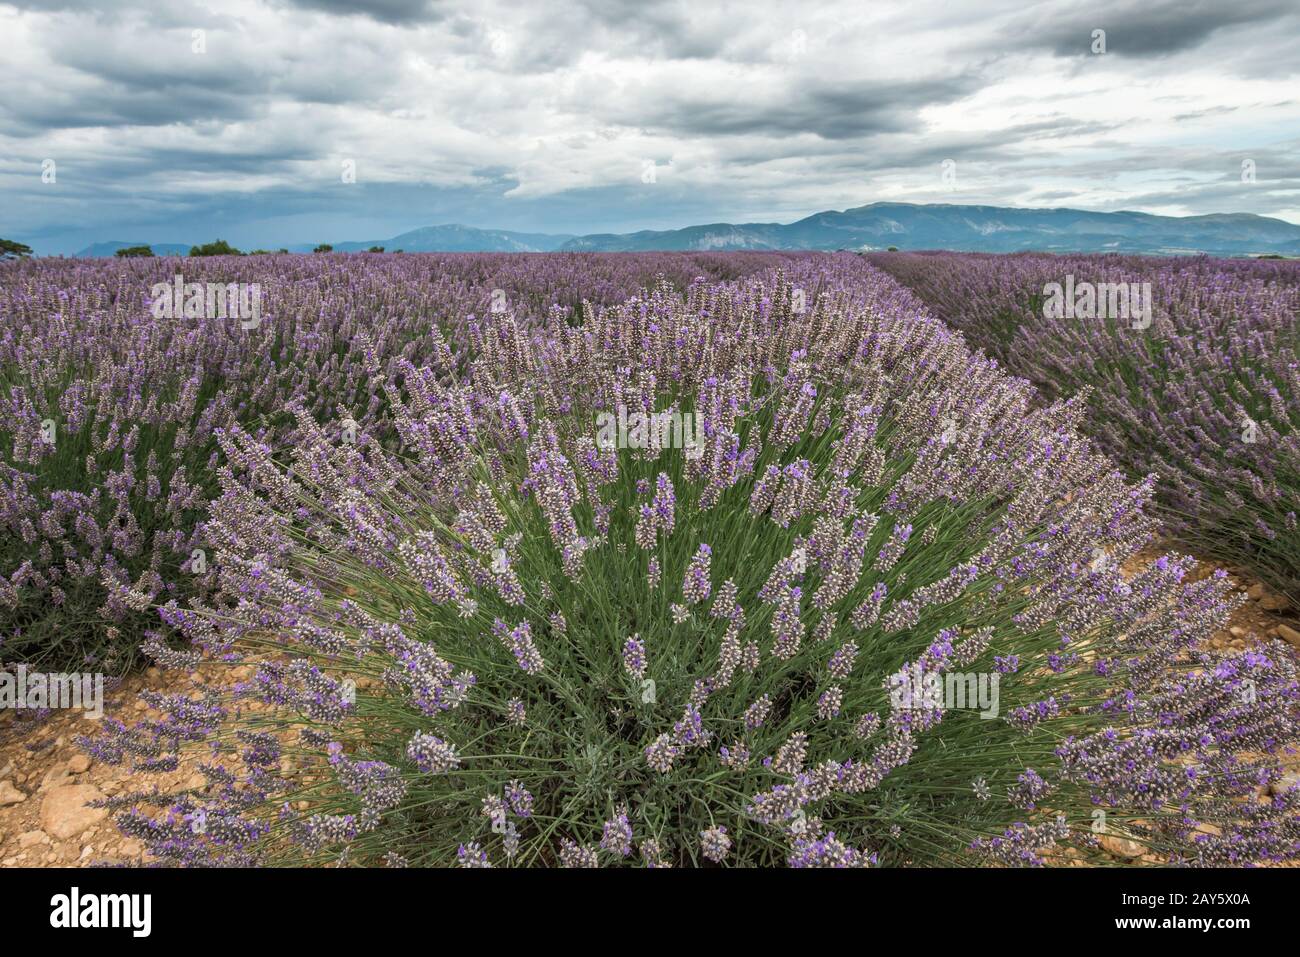 Close view of lavender blossom cluster under the clouded sky Stock Photo